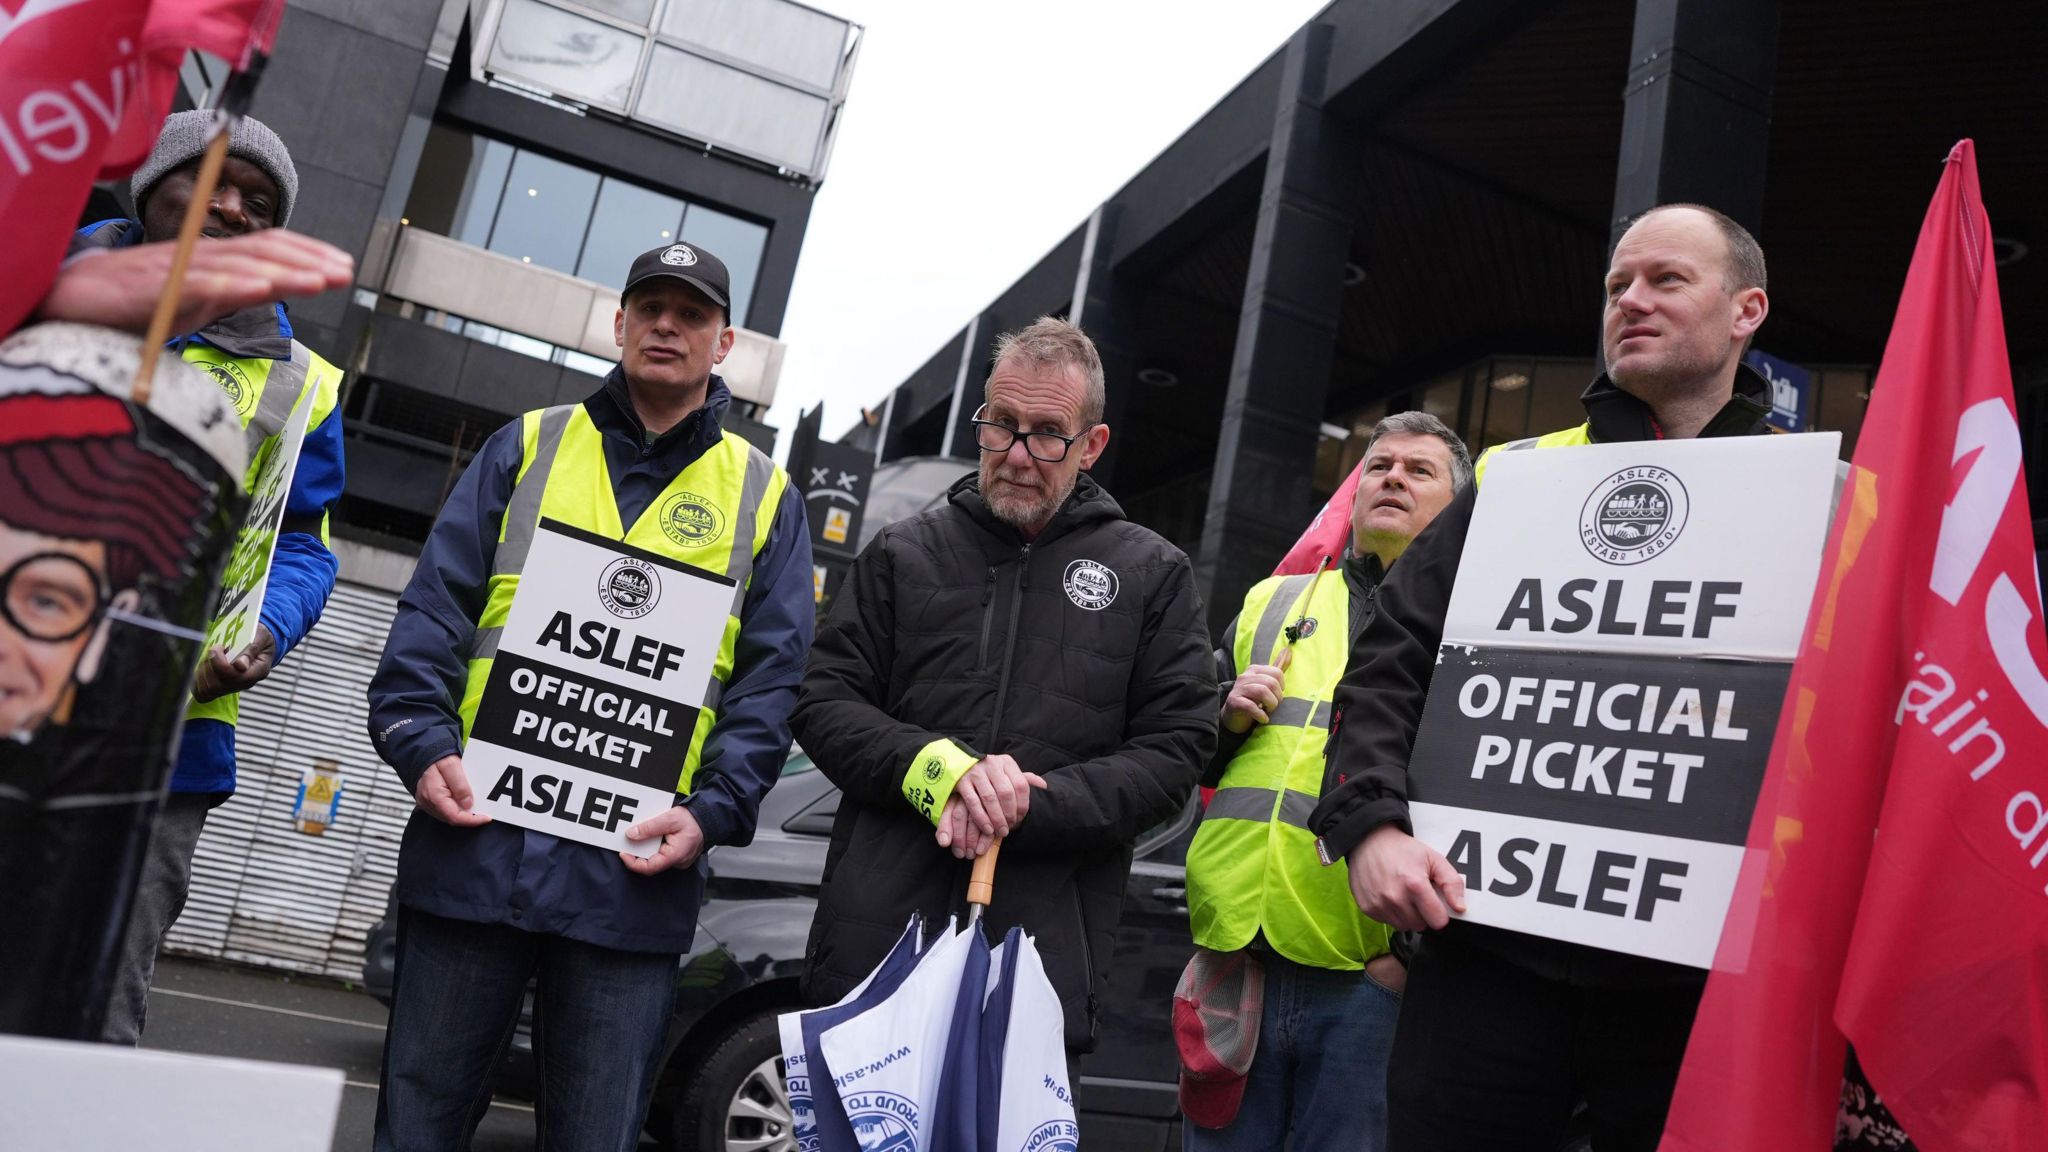 Aslef members stand on a picket line outside London Euston station